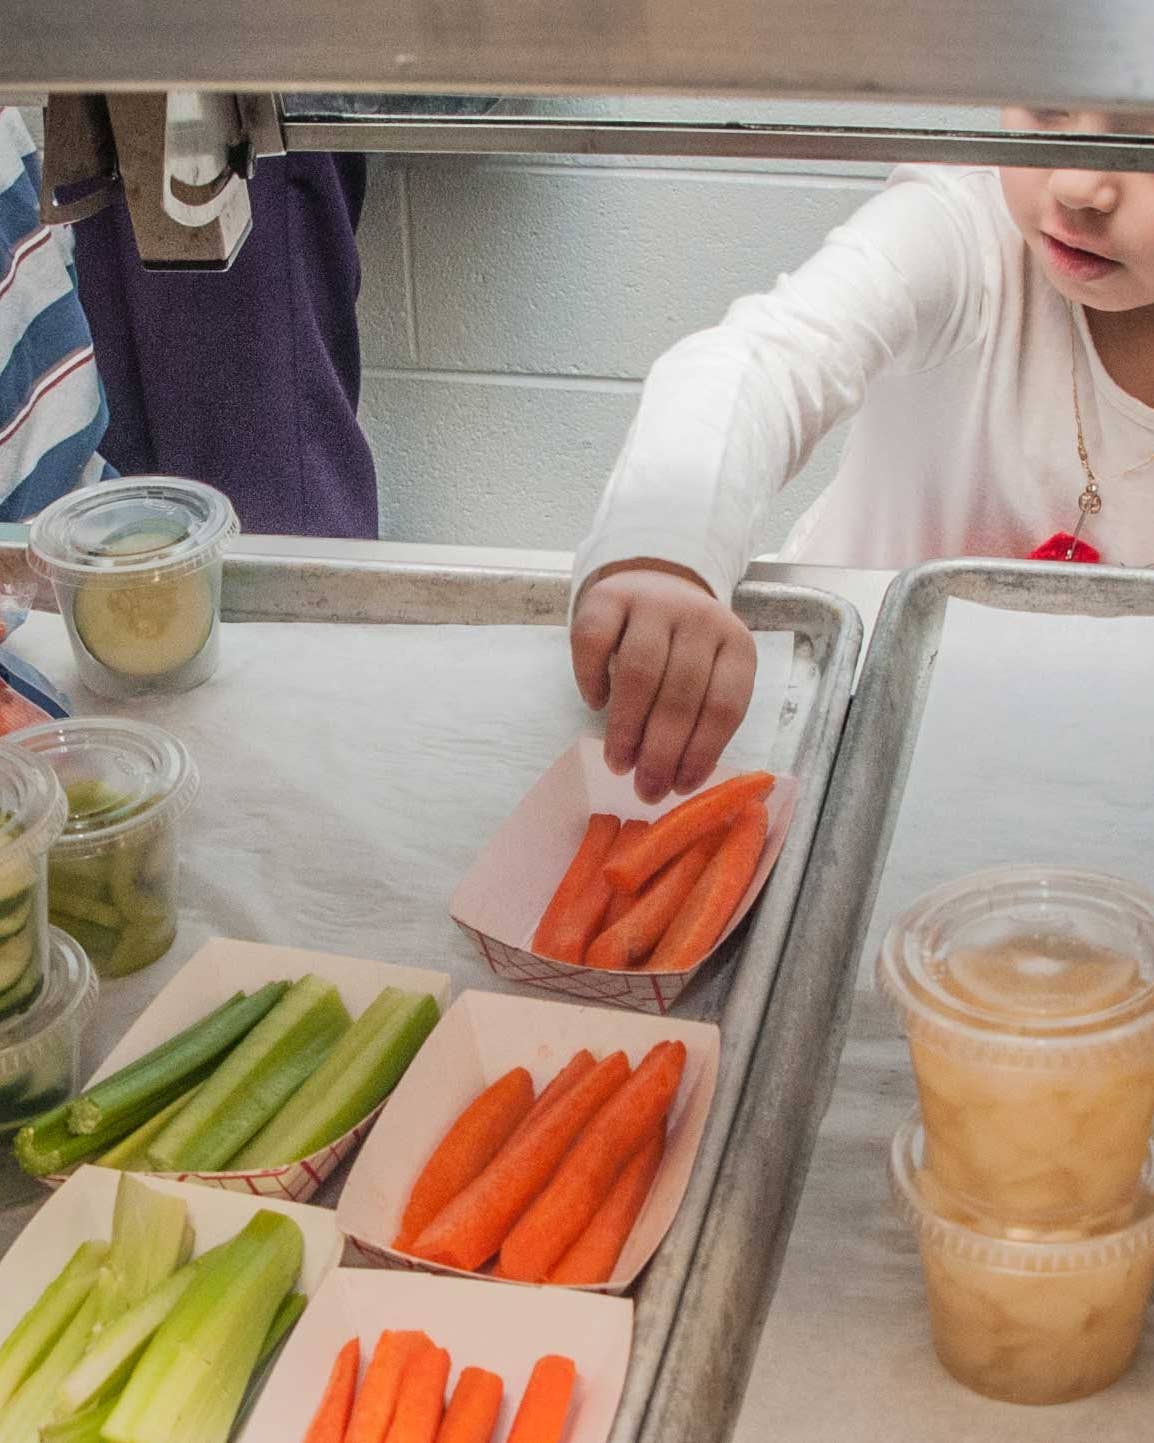 New York City Students Will Finally Get Free School Lunch